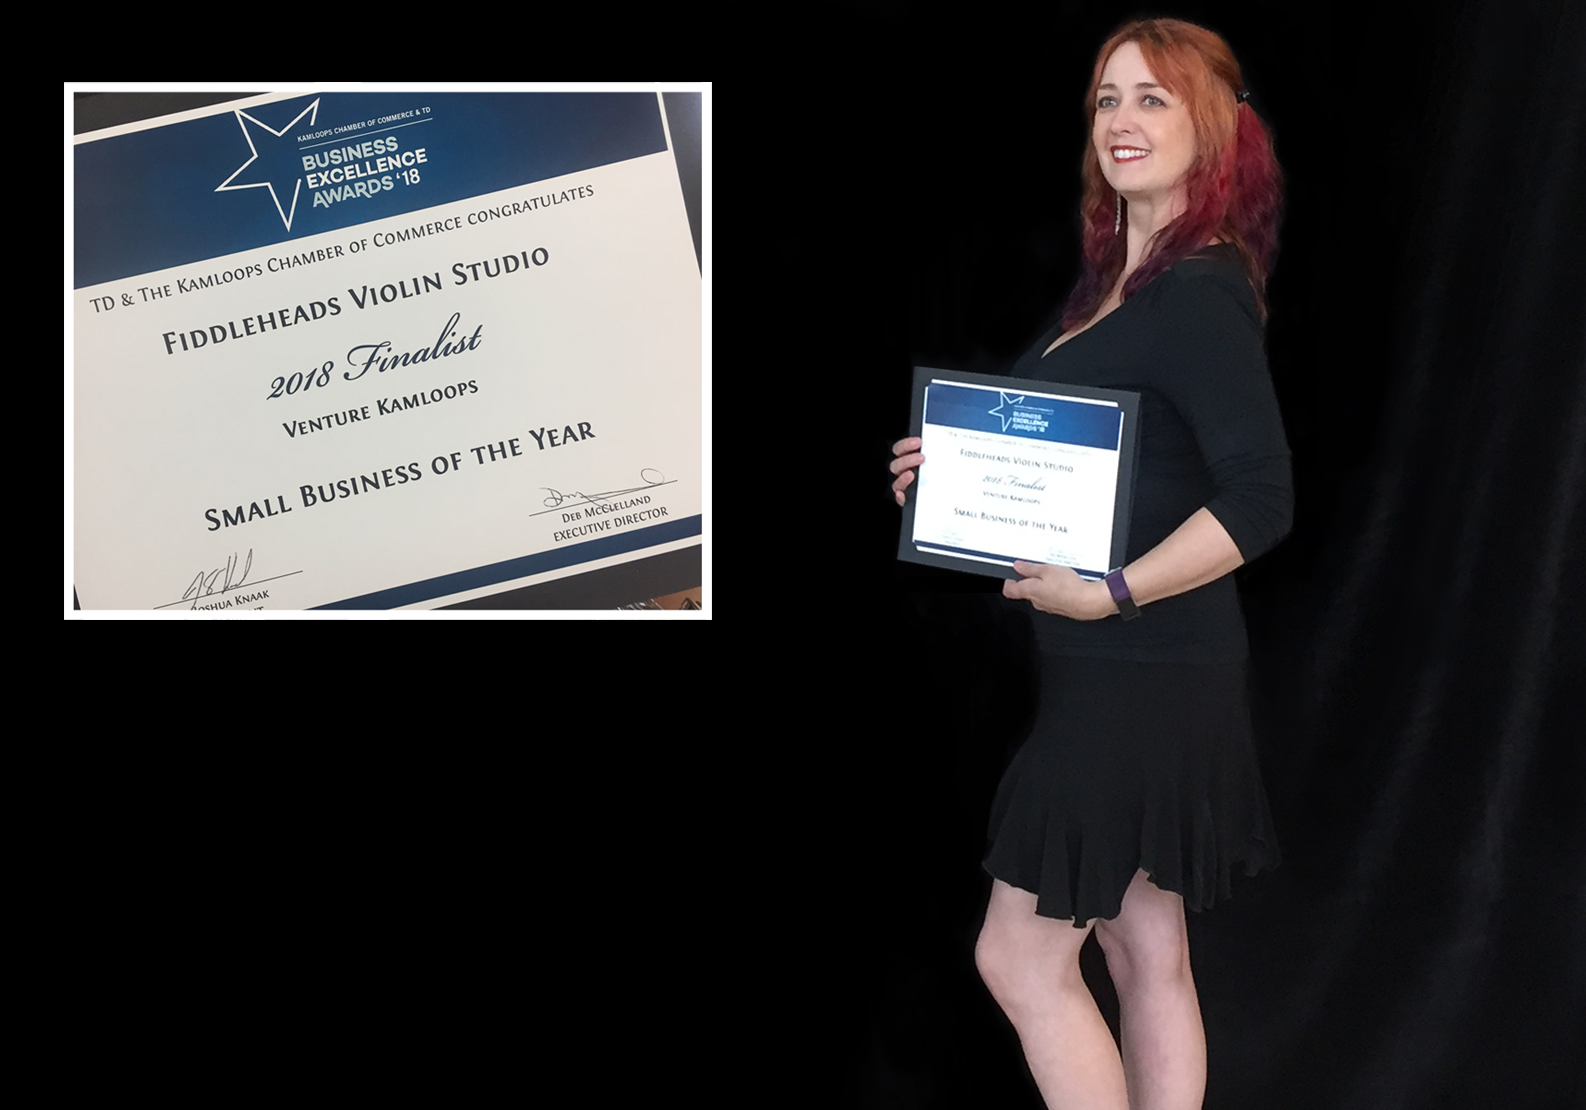 Rhiannon, with rainbow hair and wearing black, holding her finalist certificate